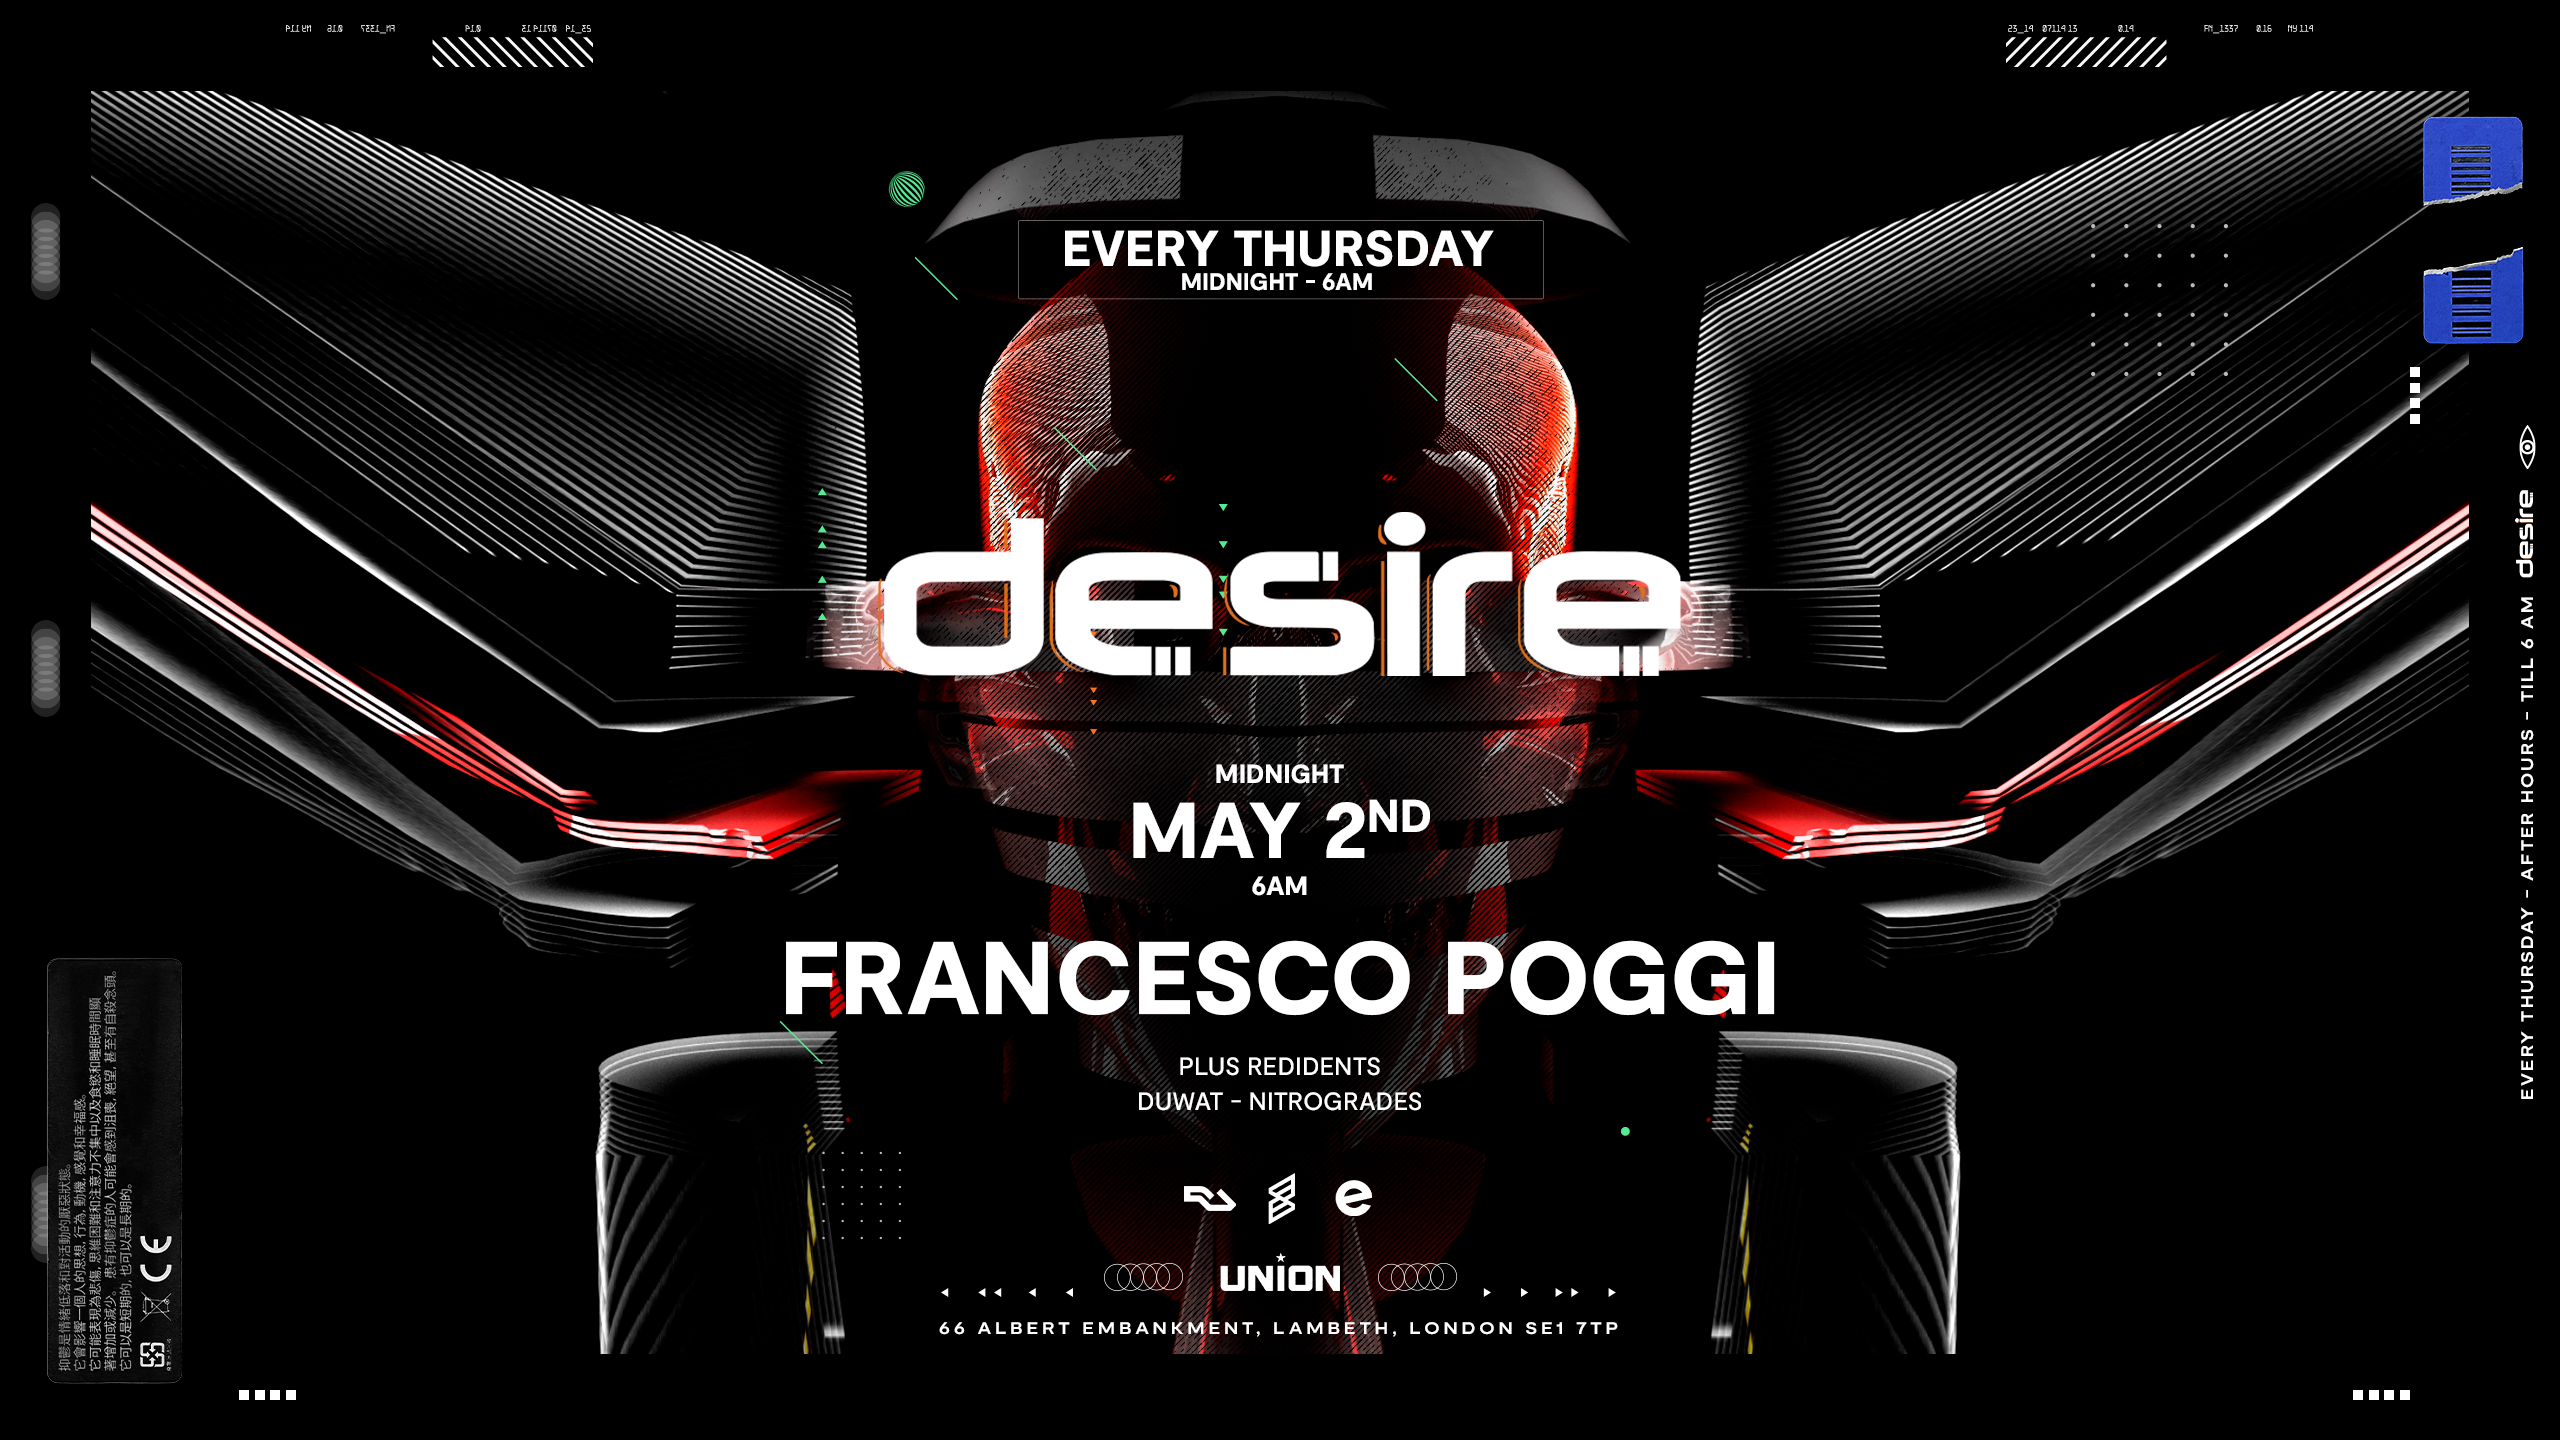 Desire (Your Weekly Thursday After Party) - Página frontal